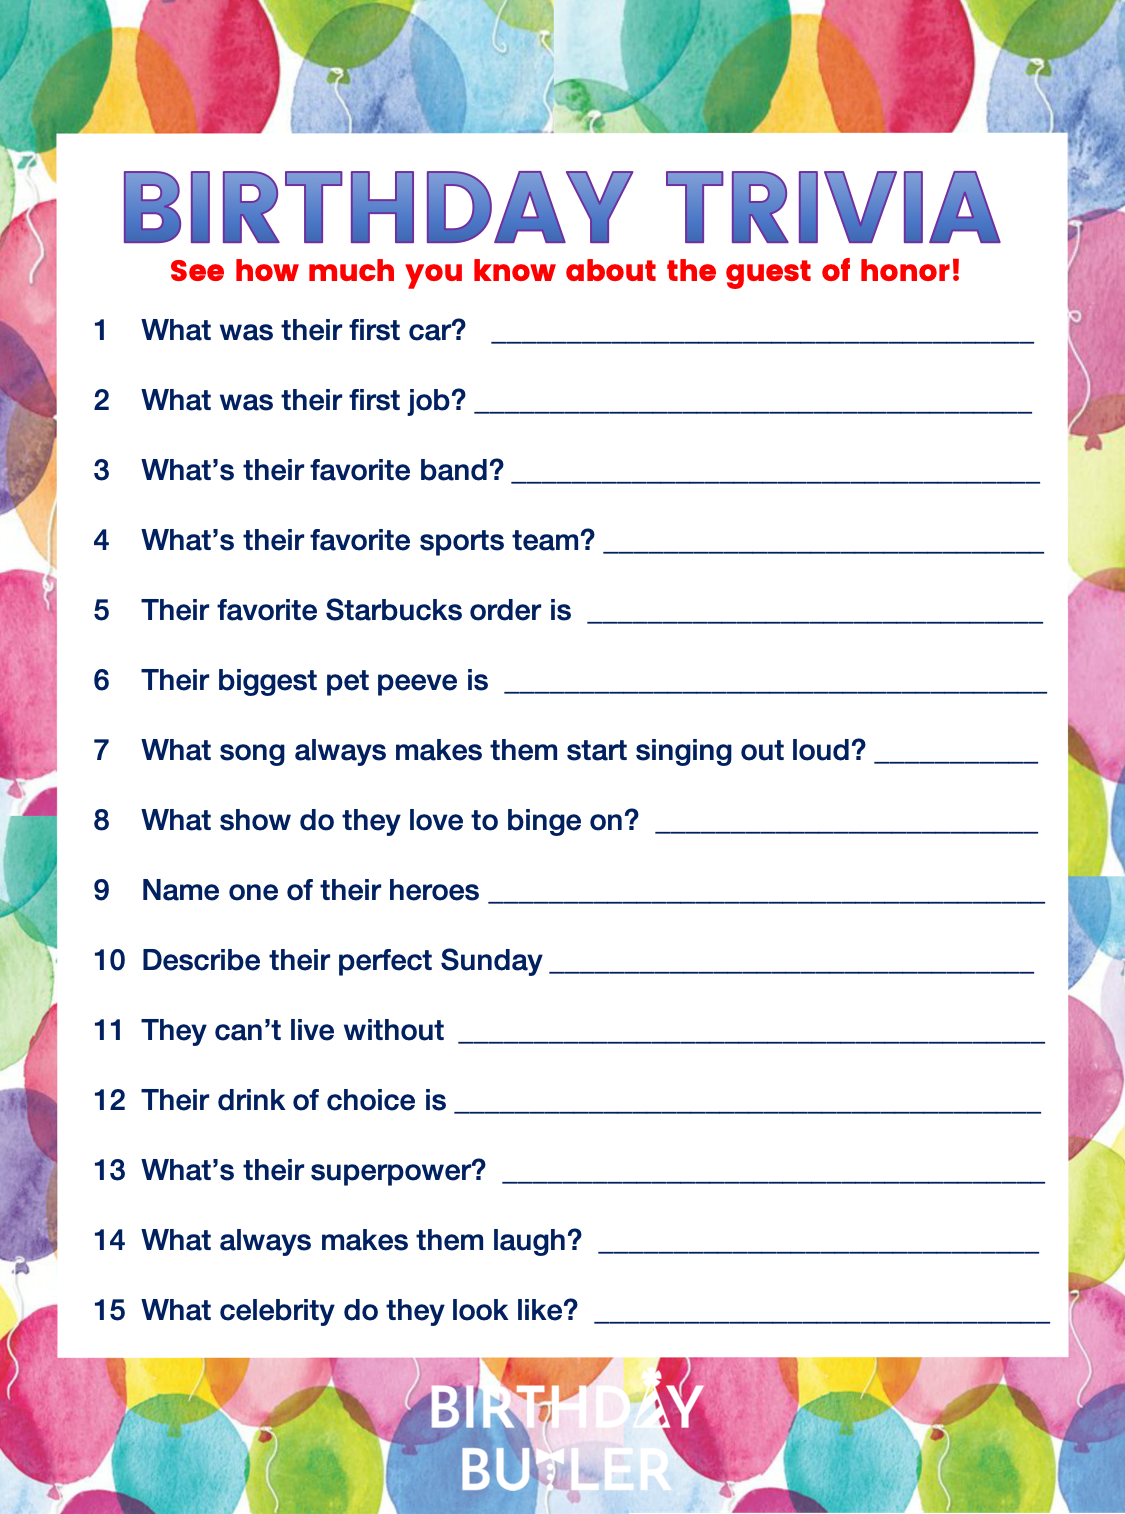 Add Oomph To Your Next Party With Birthday Trivia Adult Birthday Party Games 50th Birthday Party Games Birthday Questions